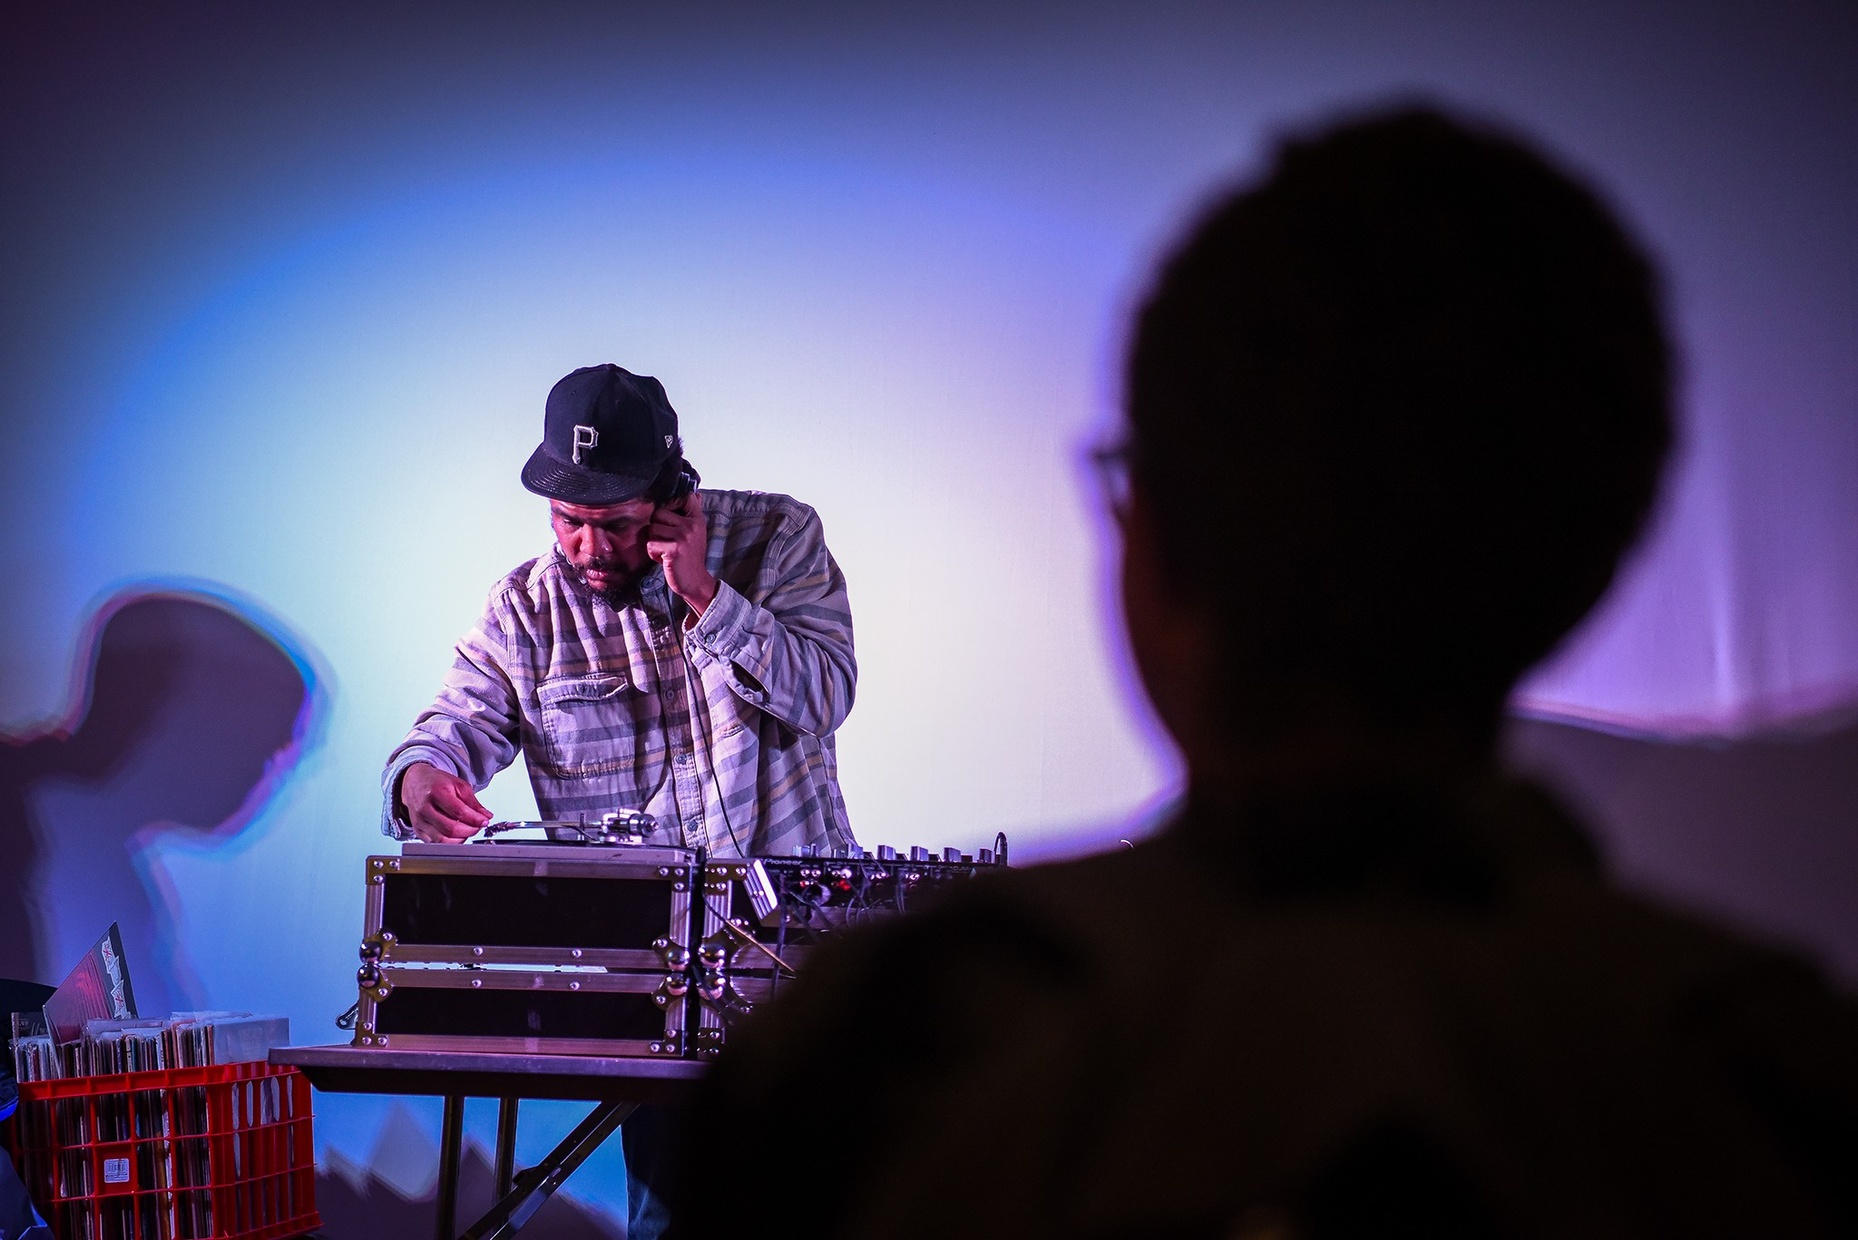 Photo of a man deejaying holding headphones to his ear with the silhouette of a woman in the foreground.